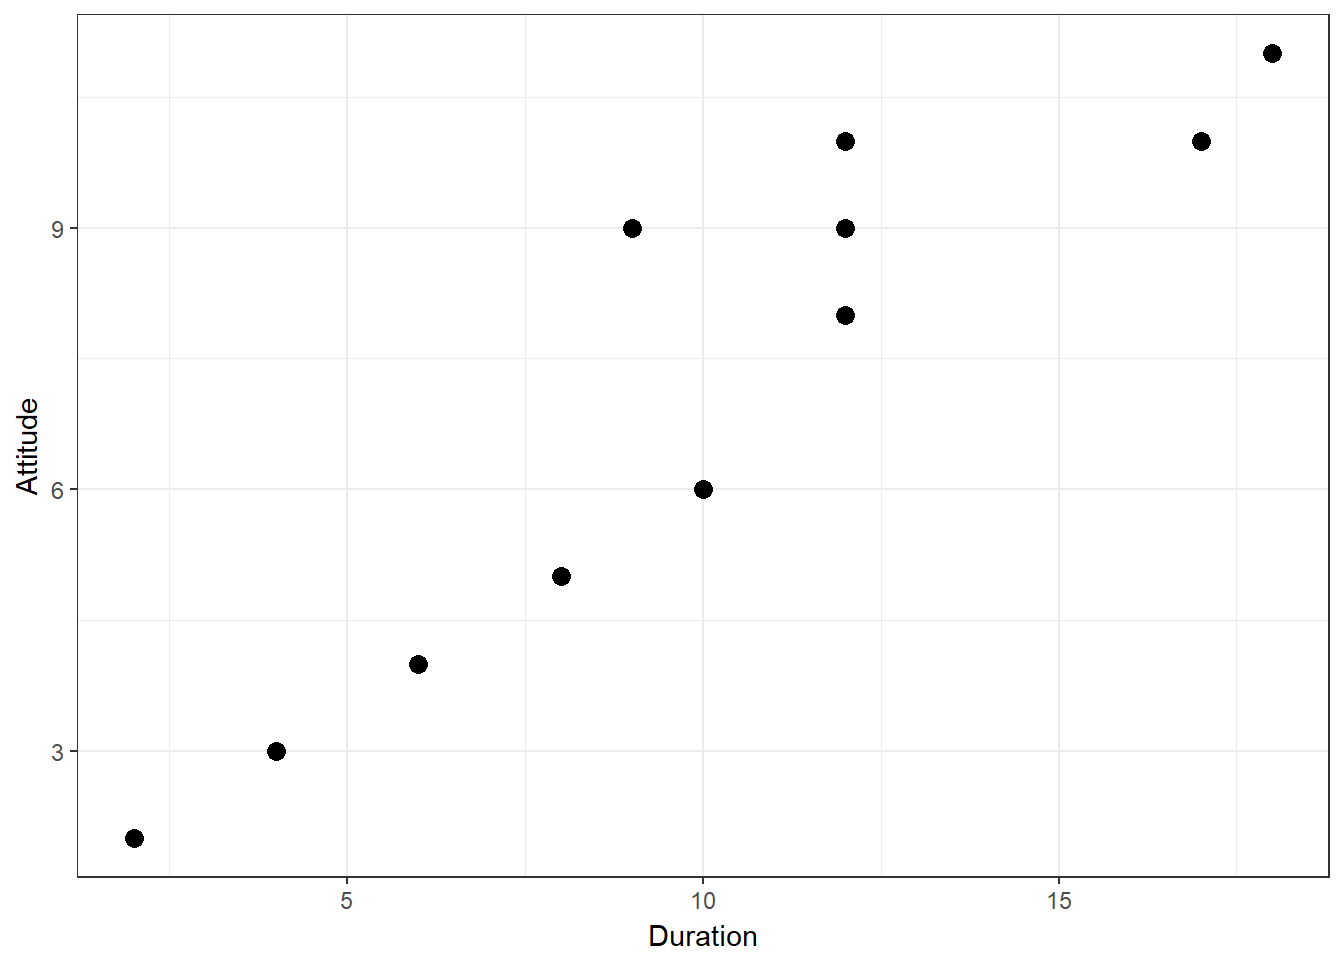 Scatterplot for durationand attitute variables